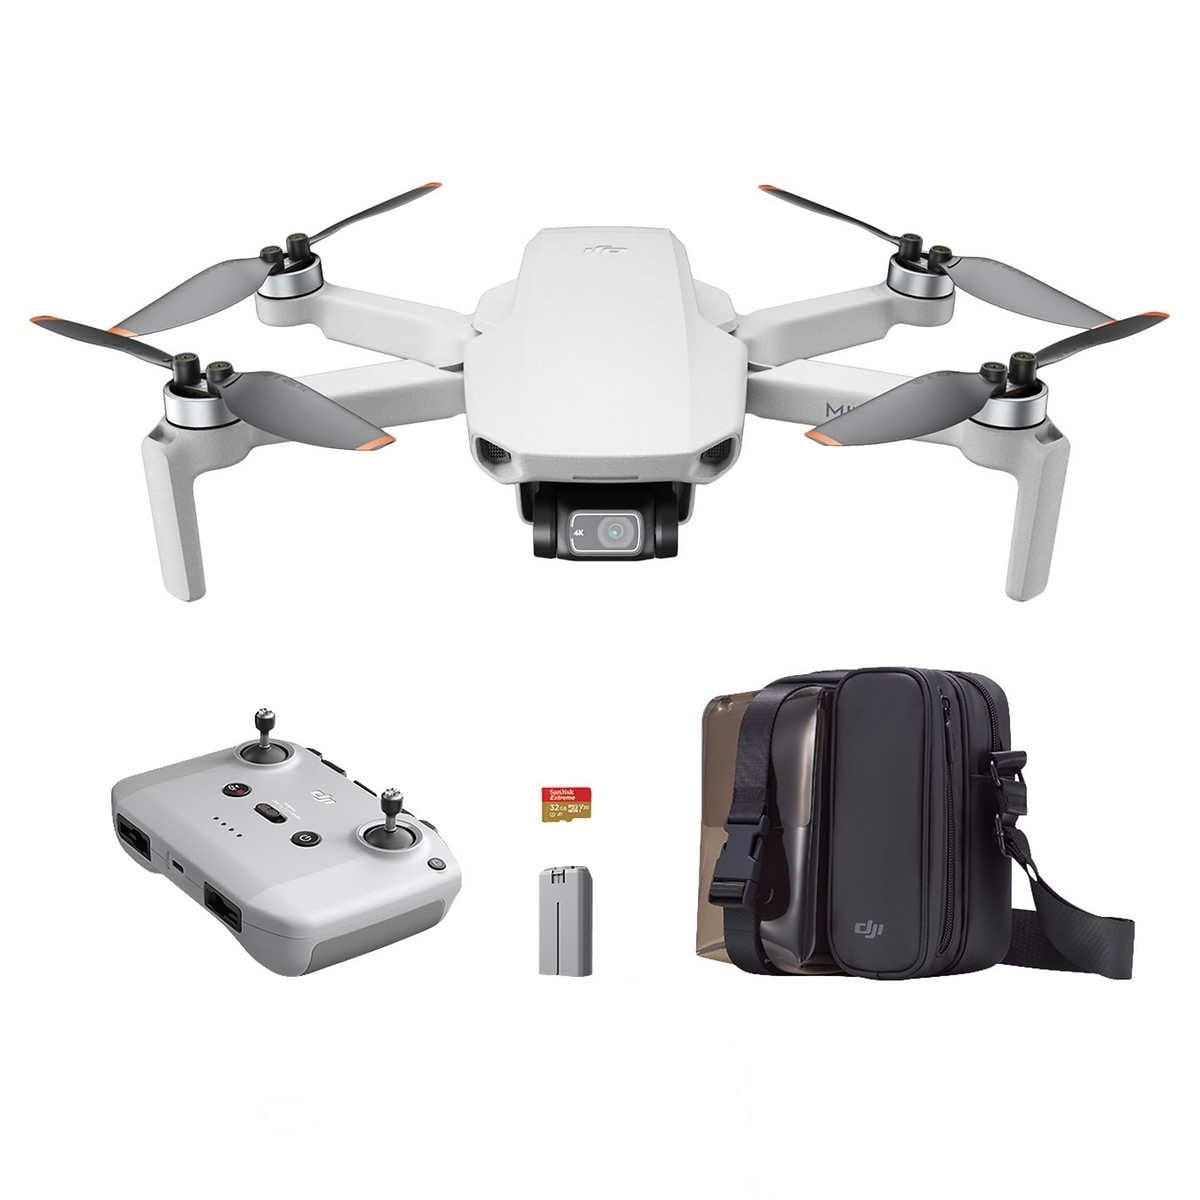 DJI Mini 2 Fly More Combo + 2 Year DJI Care Bundle Compact quadcopter with  gimbal-mounted 4K camera, three flight batteries, charger, carrying case,  remote controller, and 2 year protection plan at Crutchfield